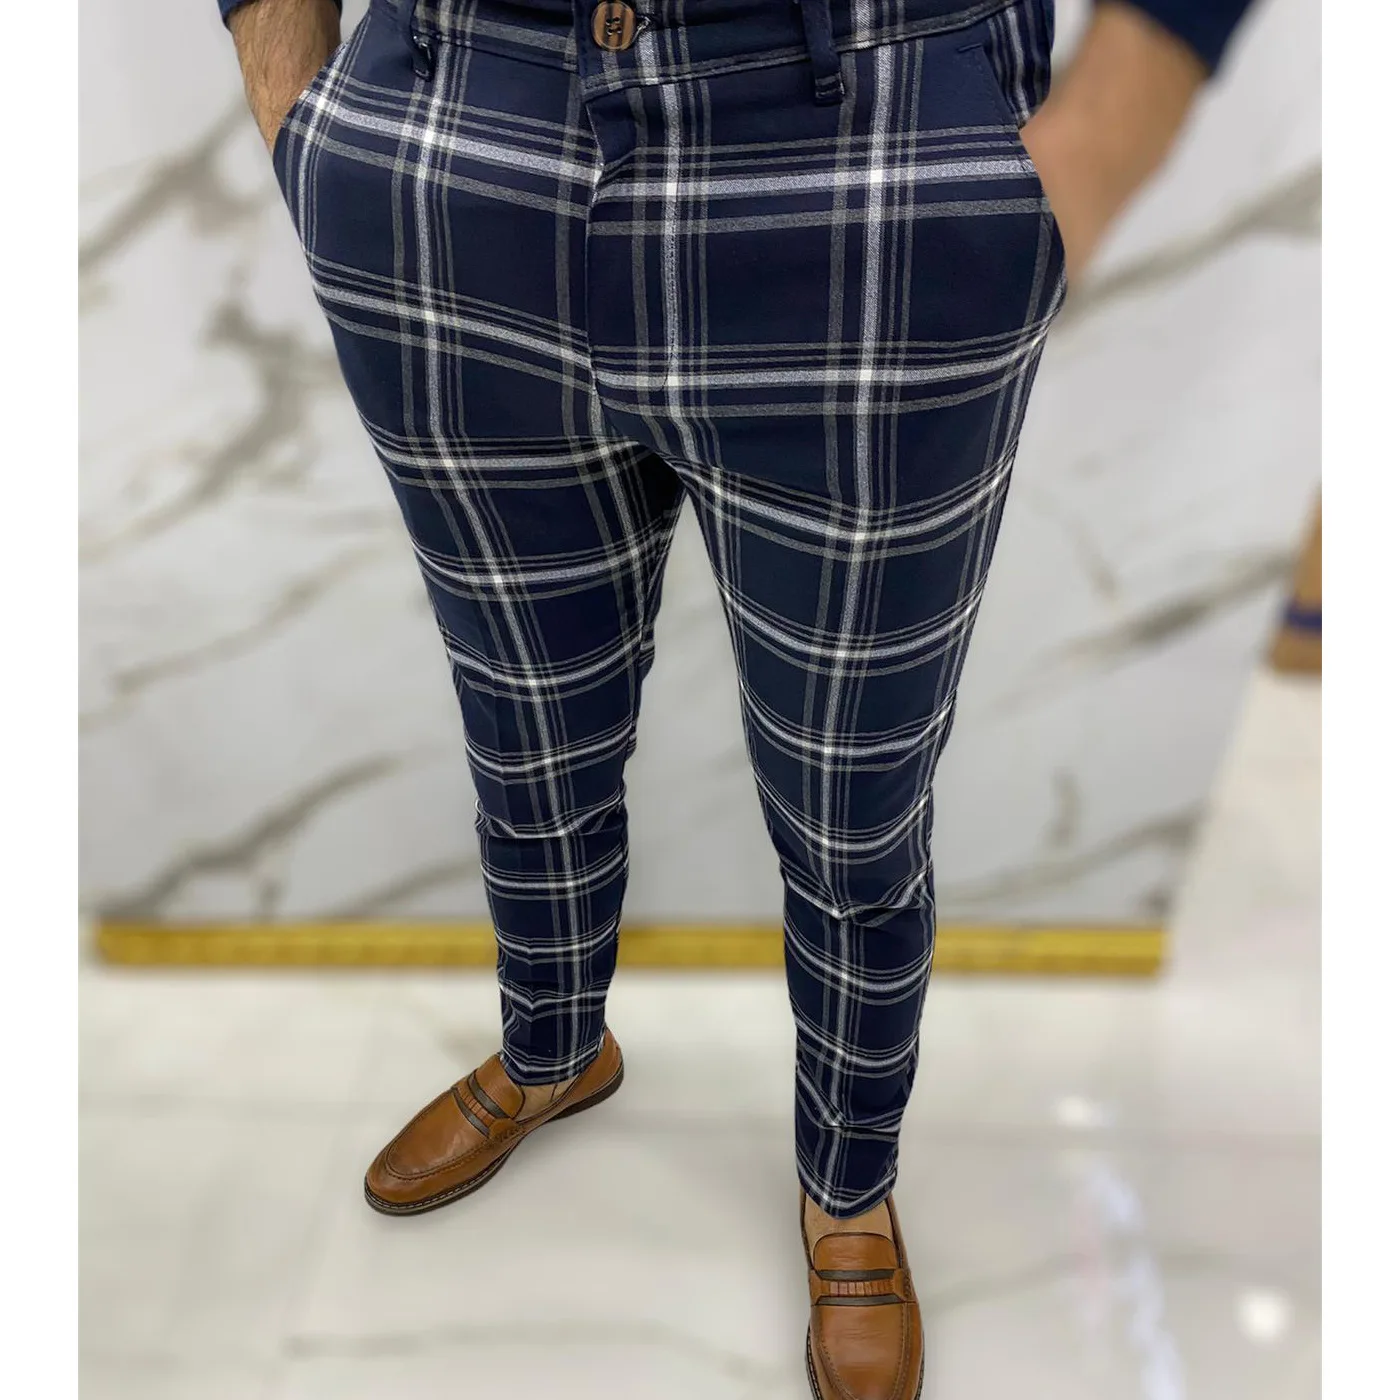 Men's Casual Navy Trousers Skinny Stretch Chinos Slim Fit Plaid Striped Checkerd Pants Male Business Pencil Pants мужские брюки